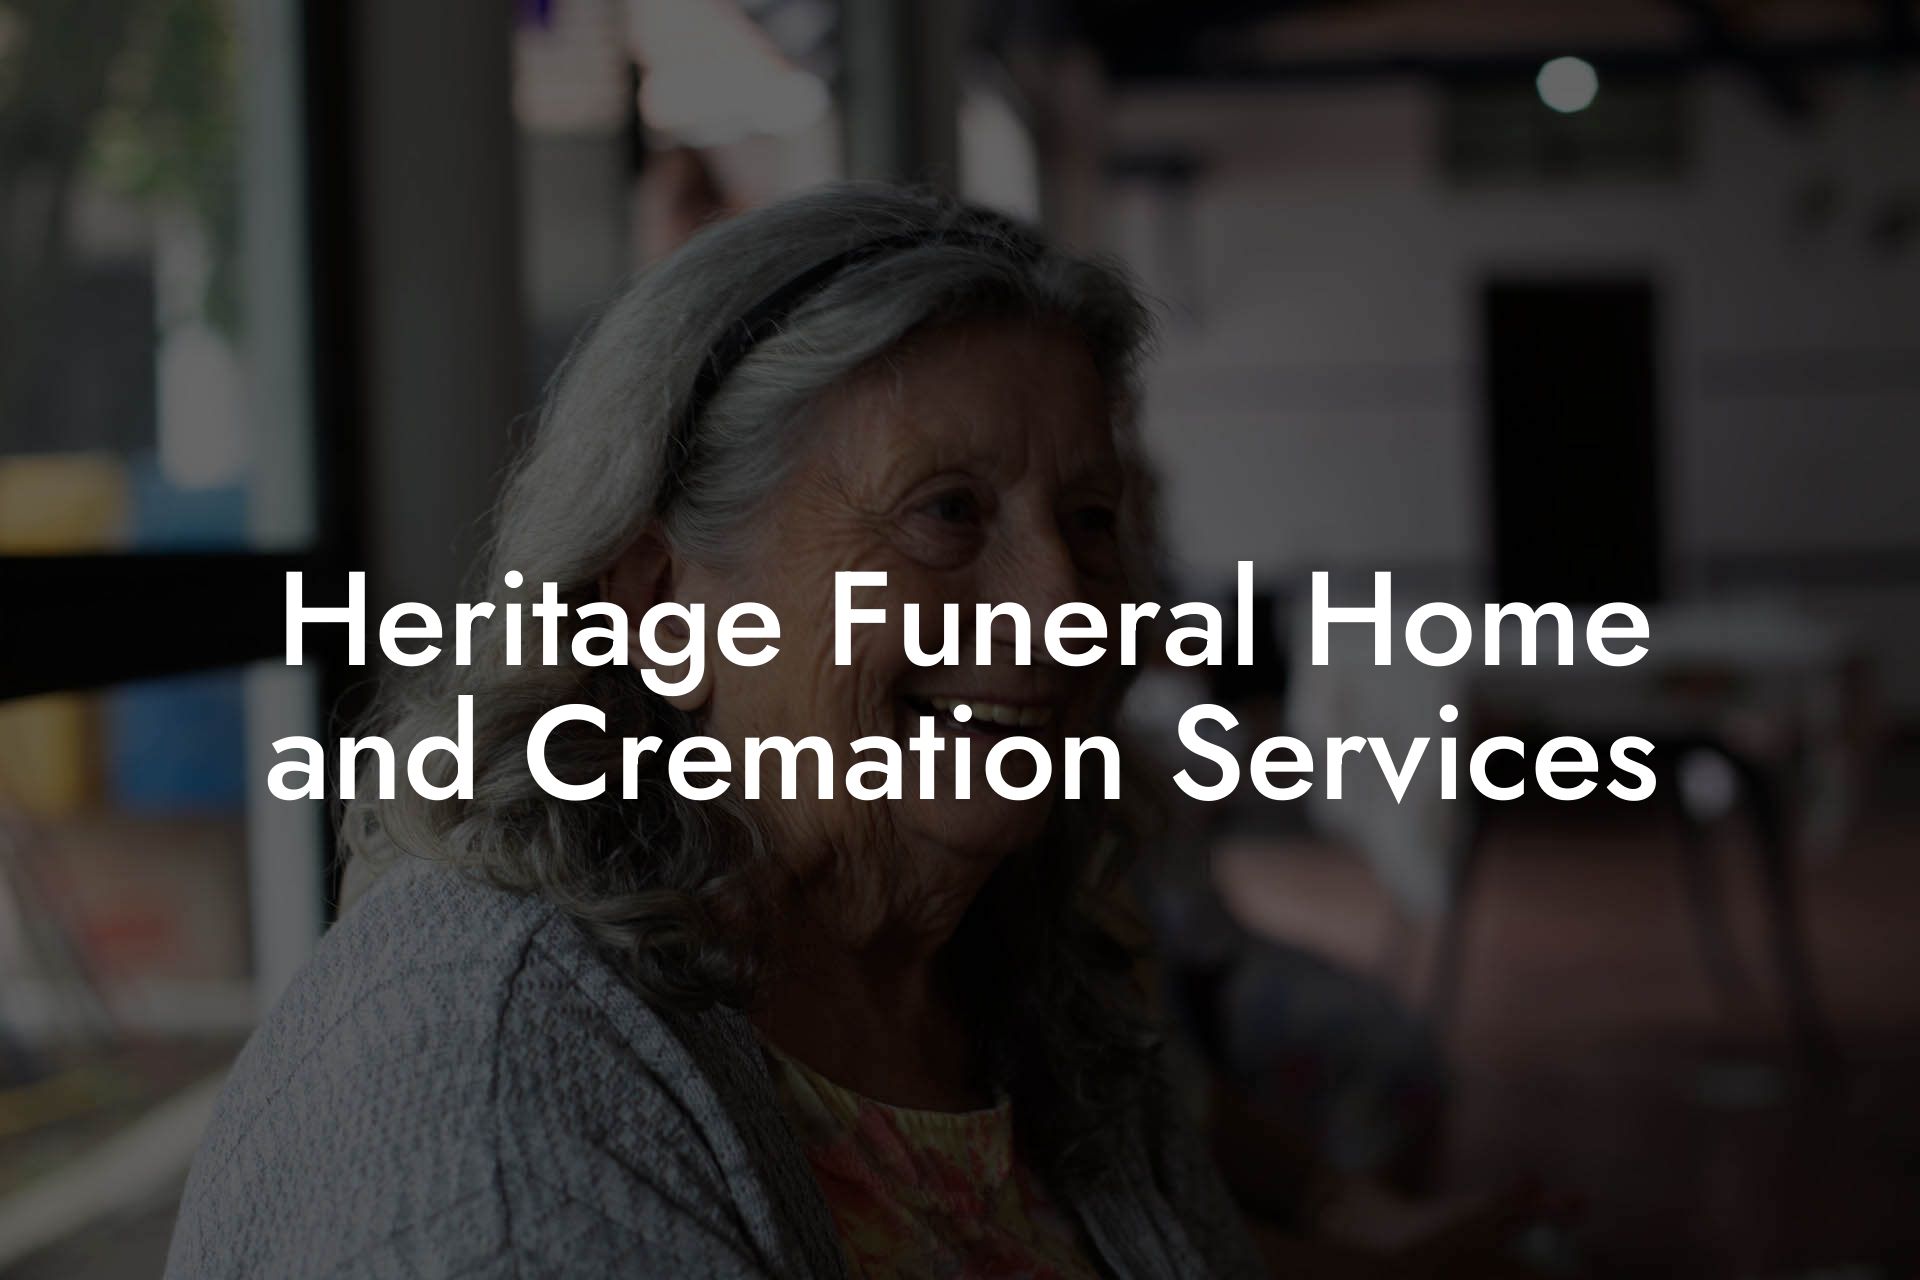 Heritage Funeral Home and Cremation Services